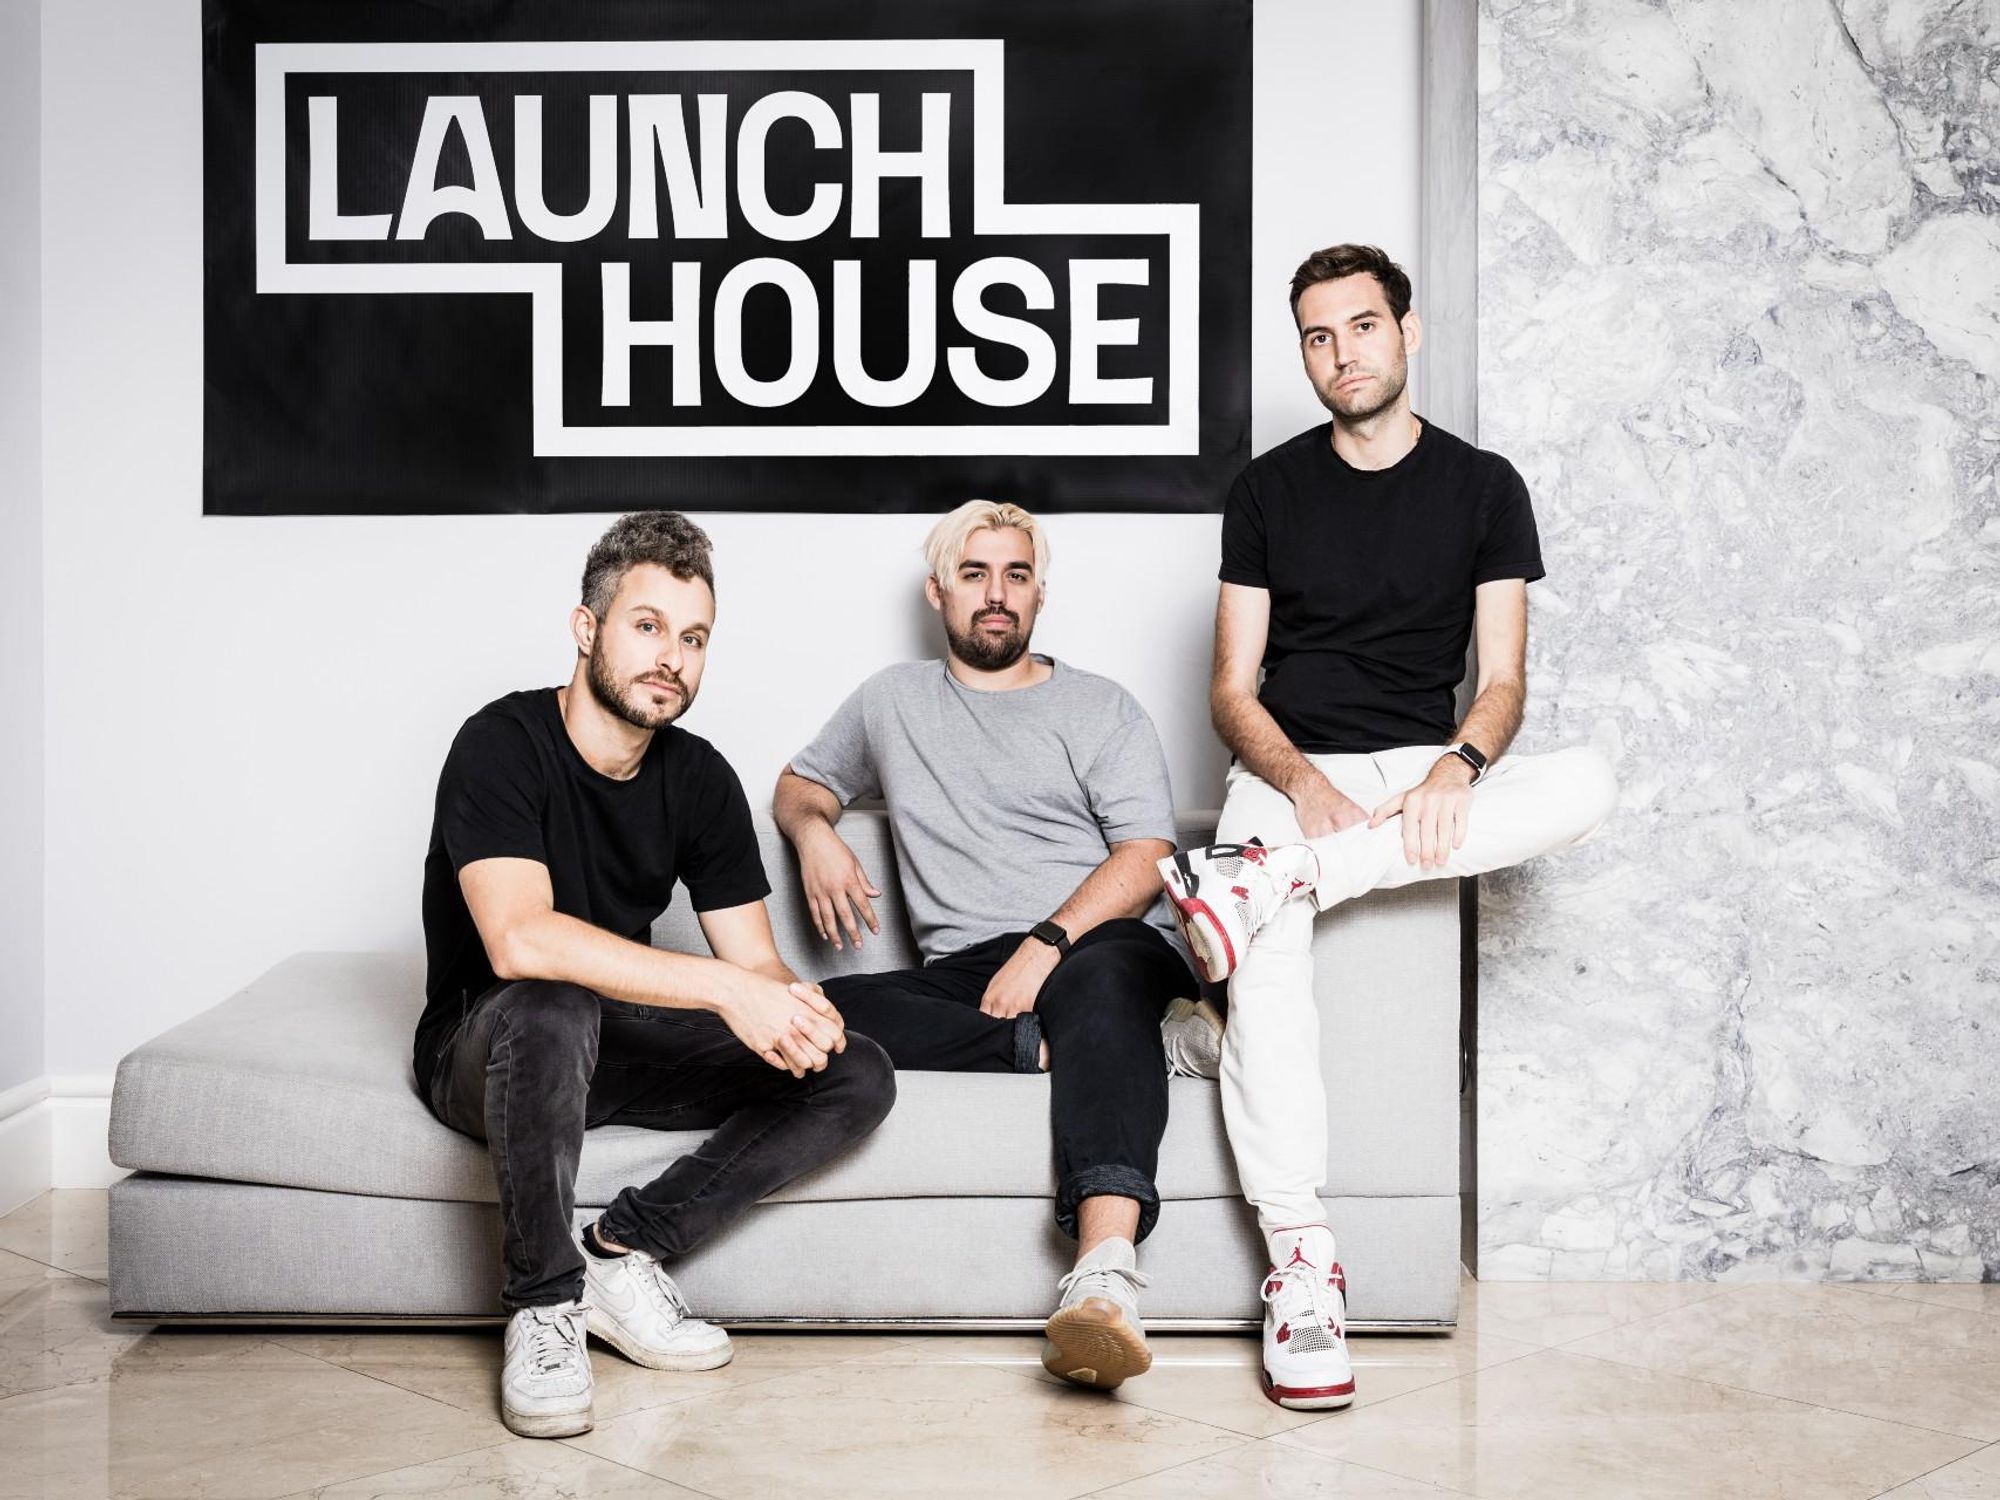 Launch House Brings Its Unique Approach to Startups to Cities Beyond SoCal